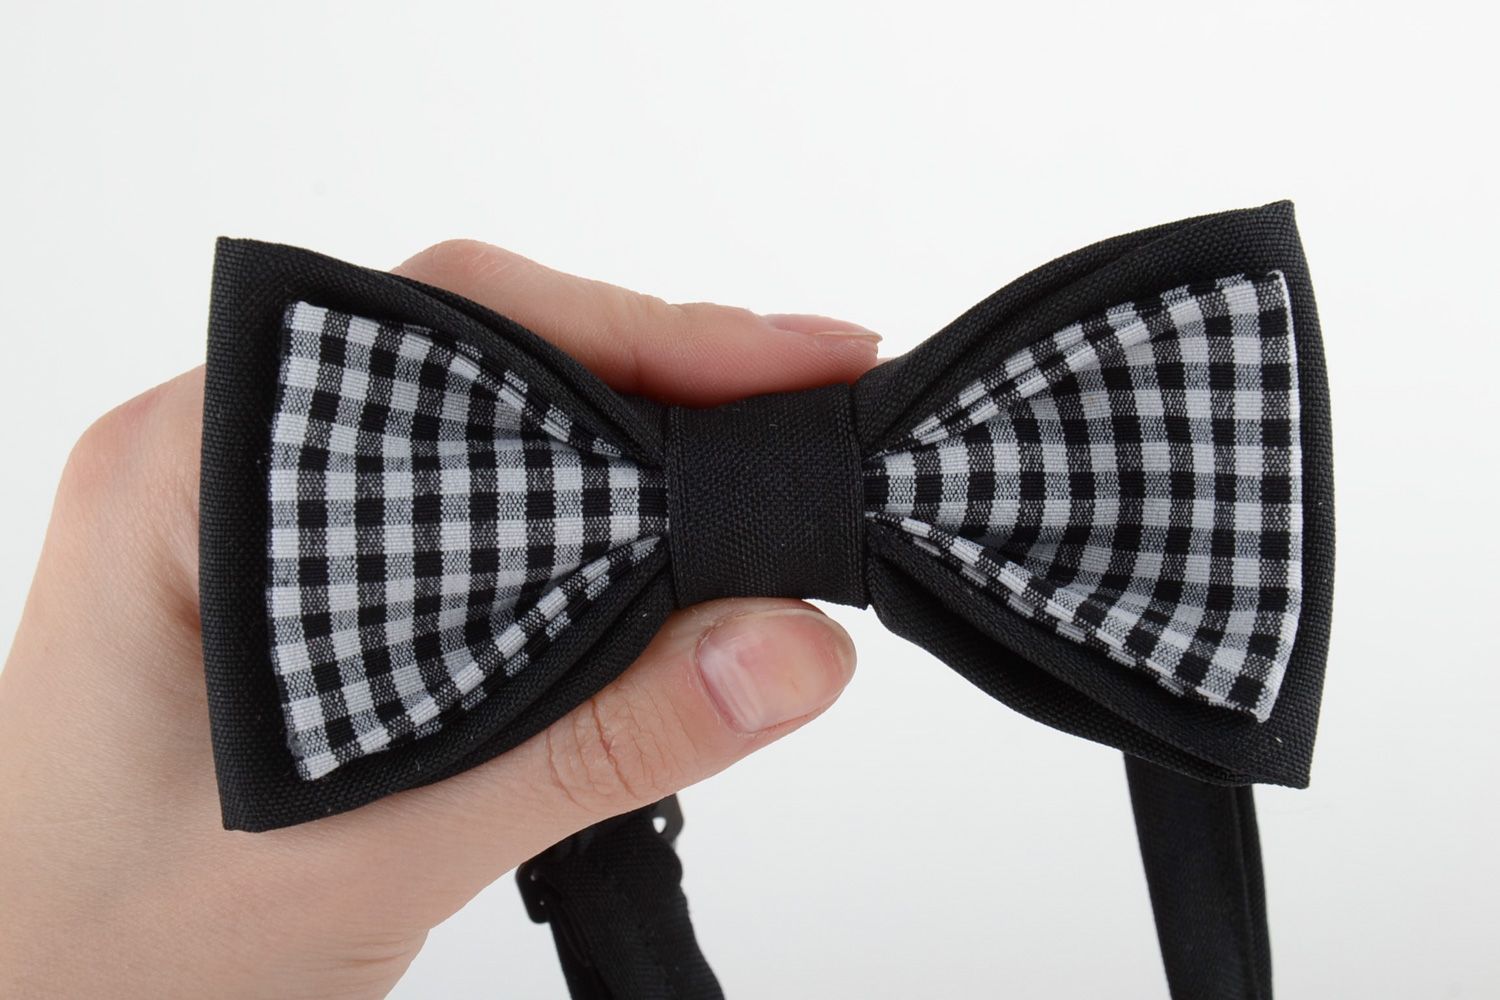 Handmade bow tie sewn of black and checkered costume fabric for men photo 5